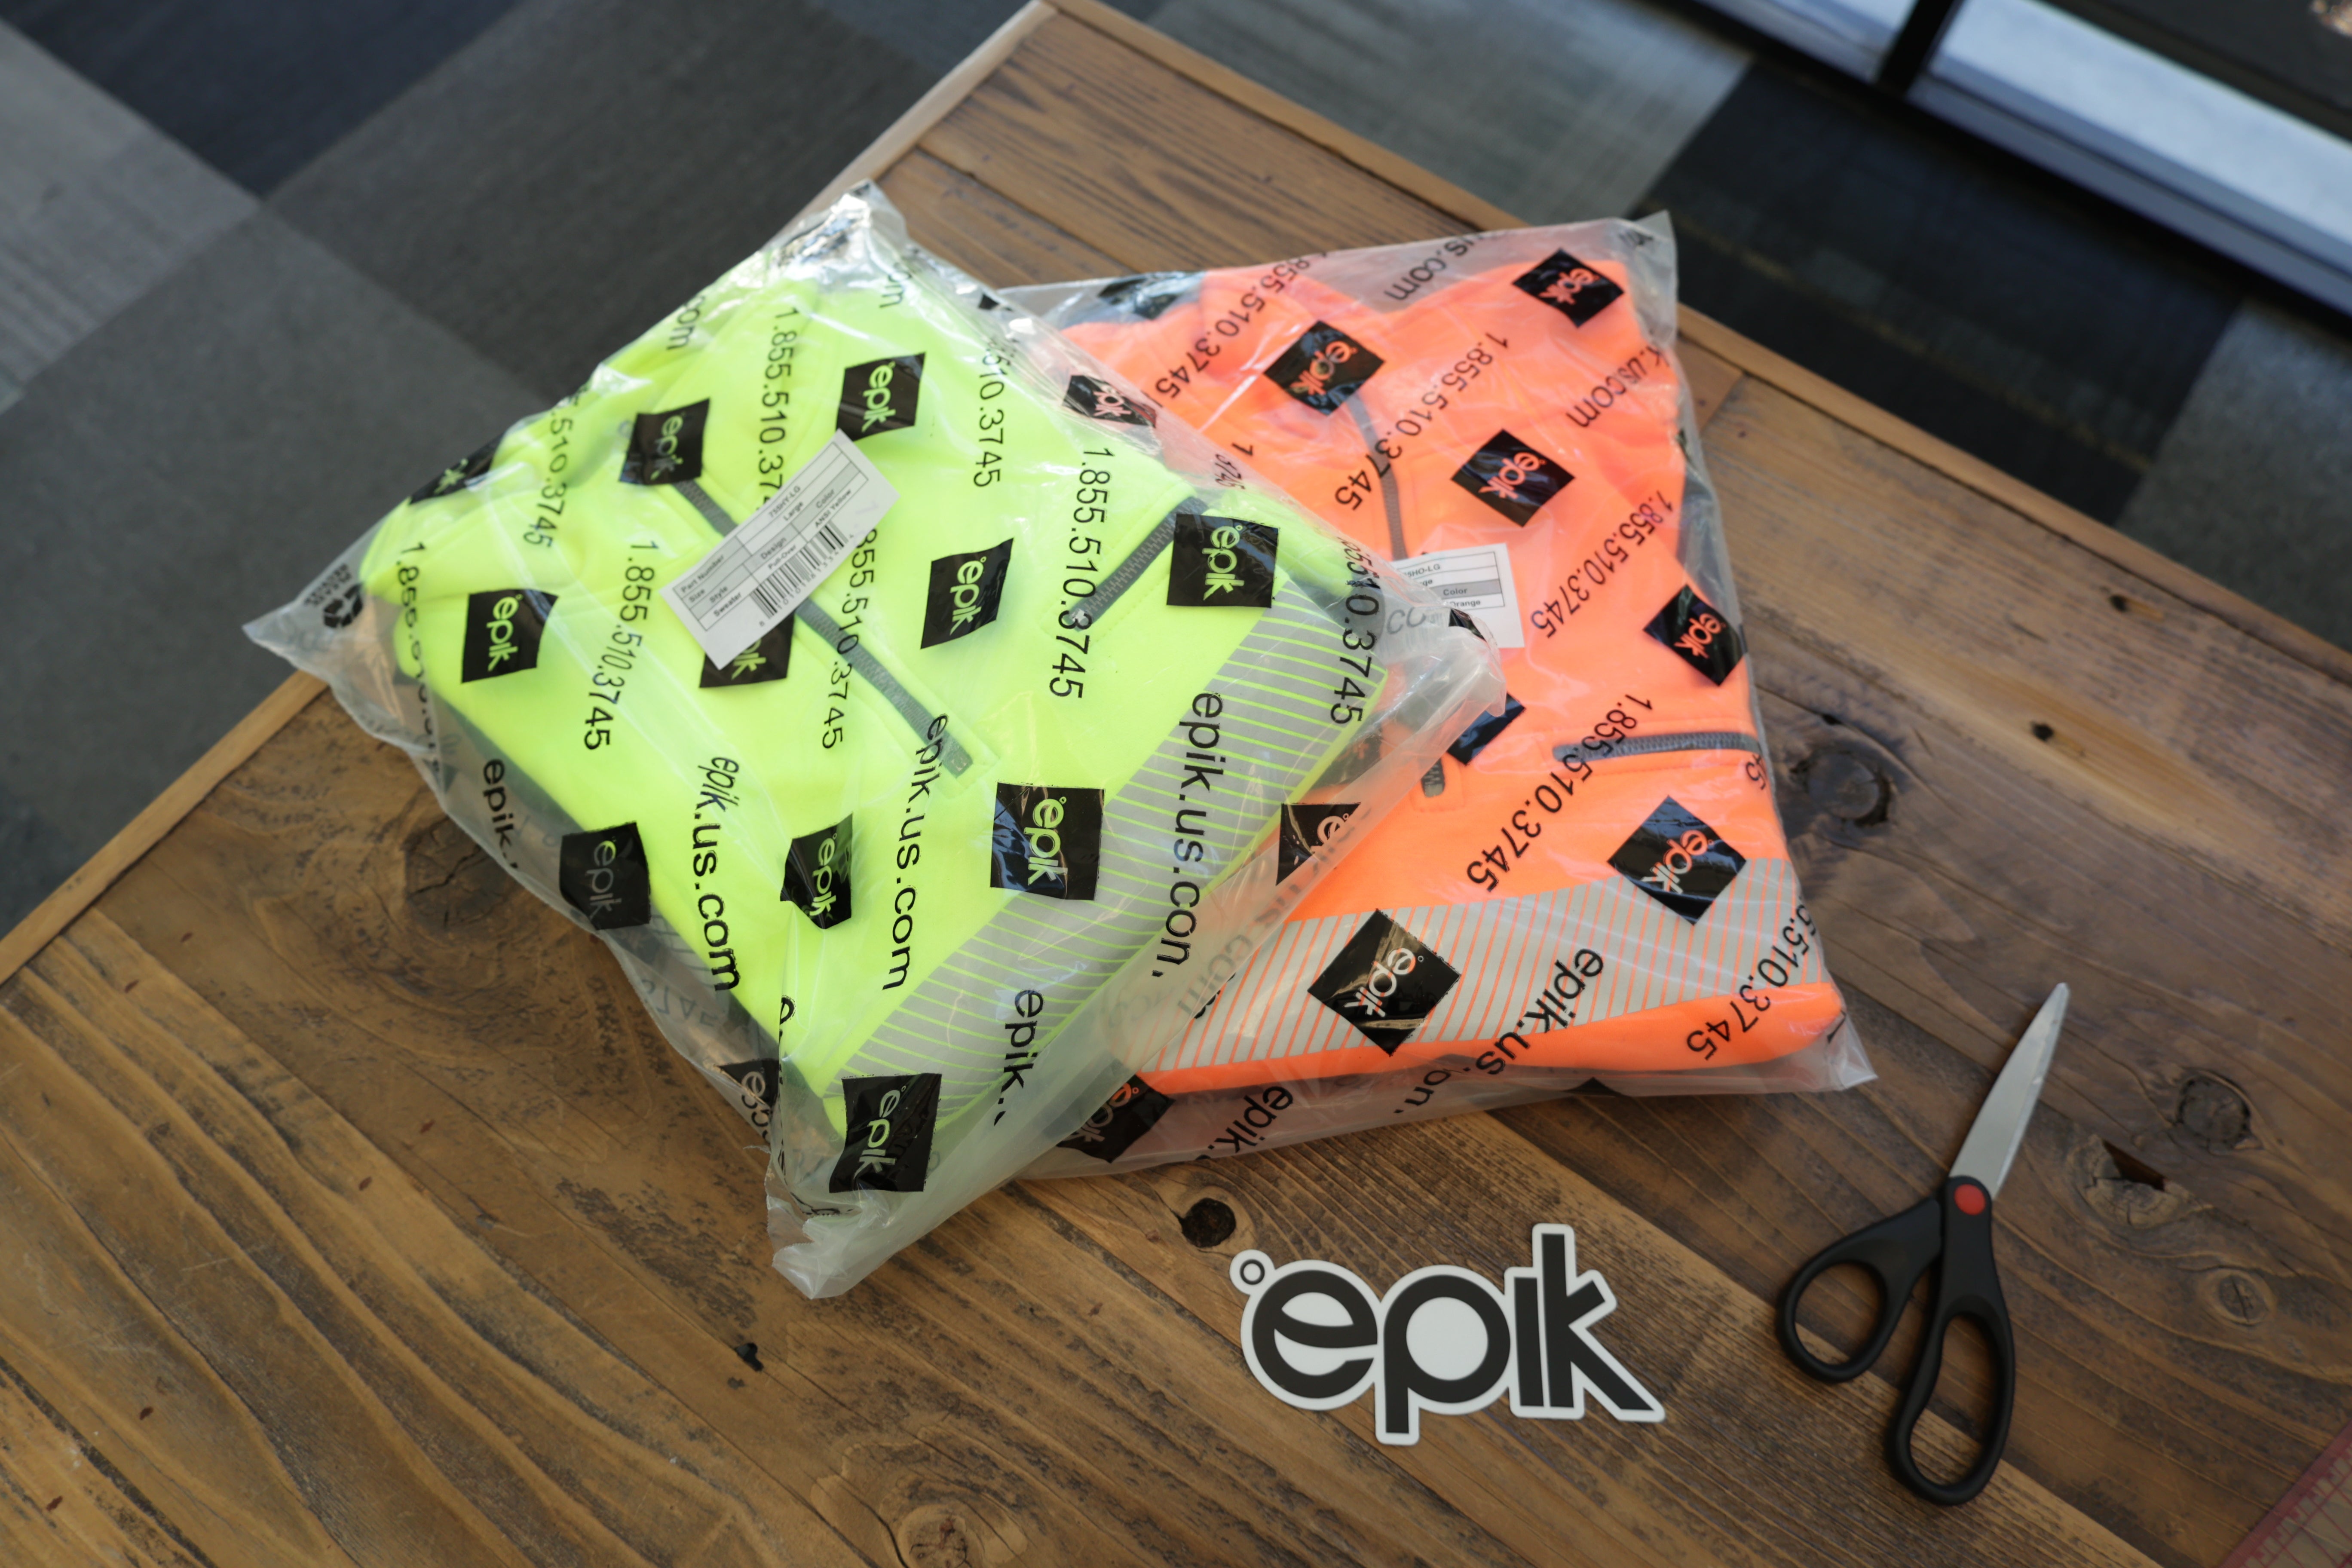 Epik Packaging free shipping on orders over $135